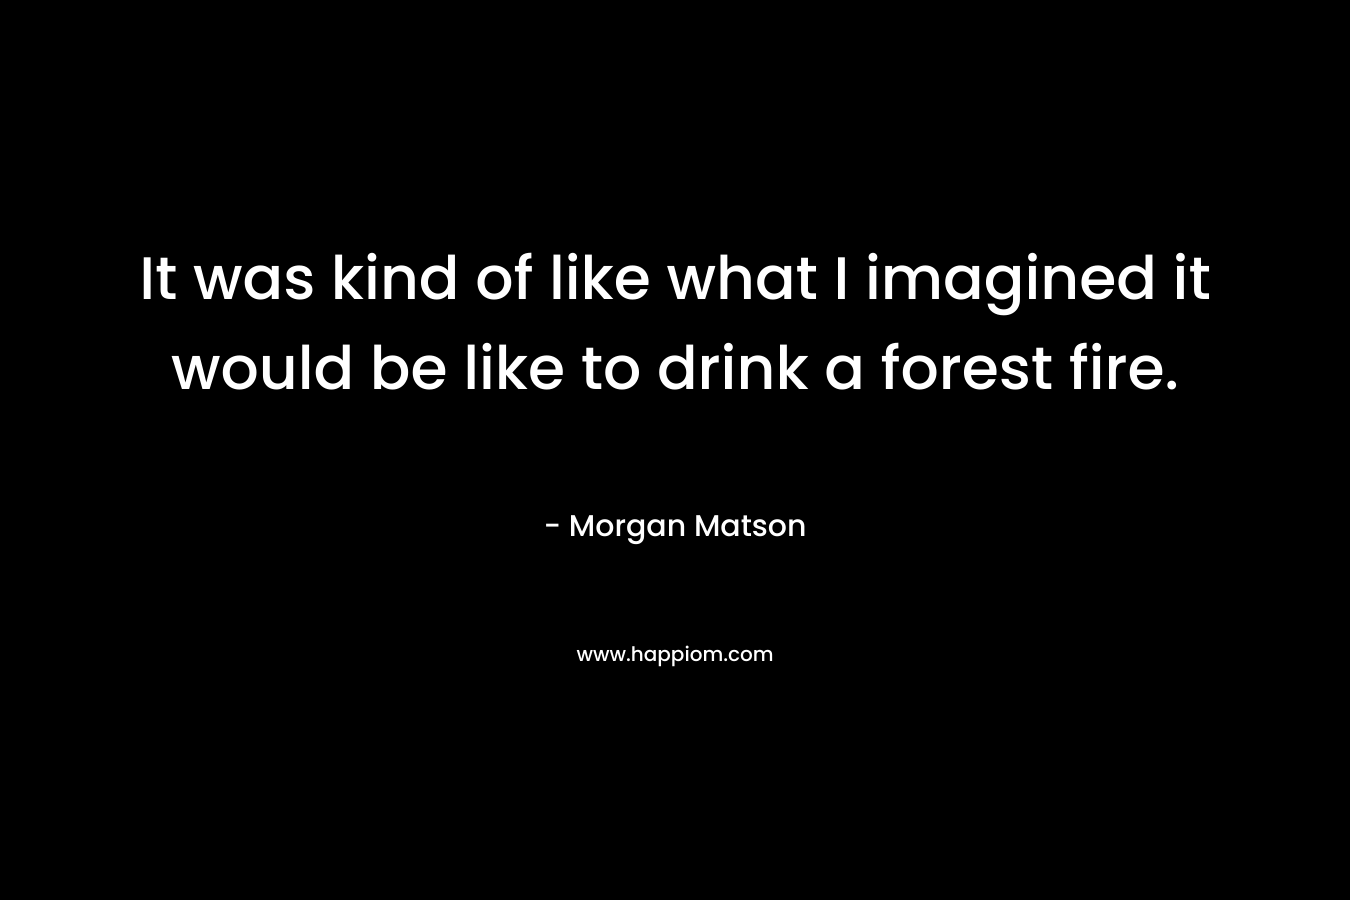 It was kind of like what I imagined it would be like to drink a forest fire. – Morgan Matson